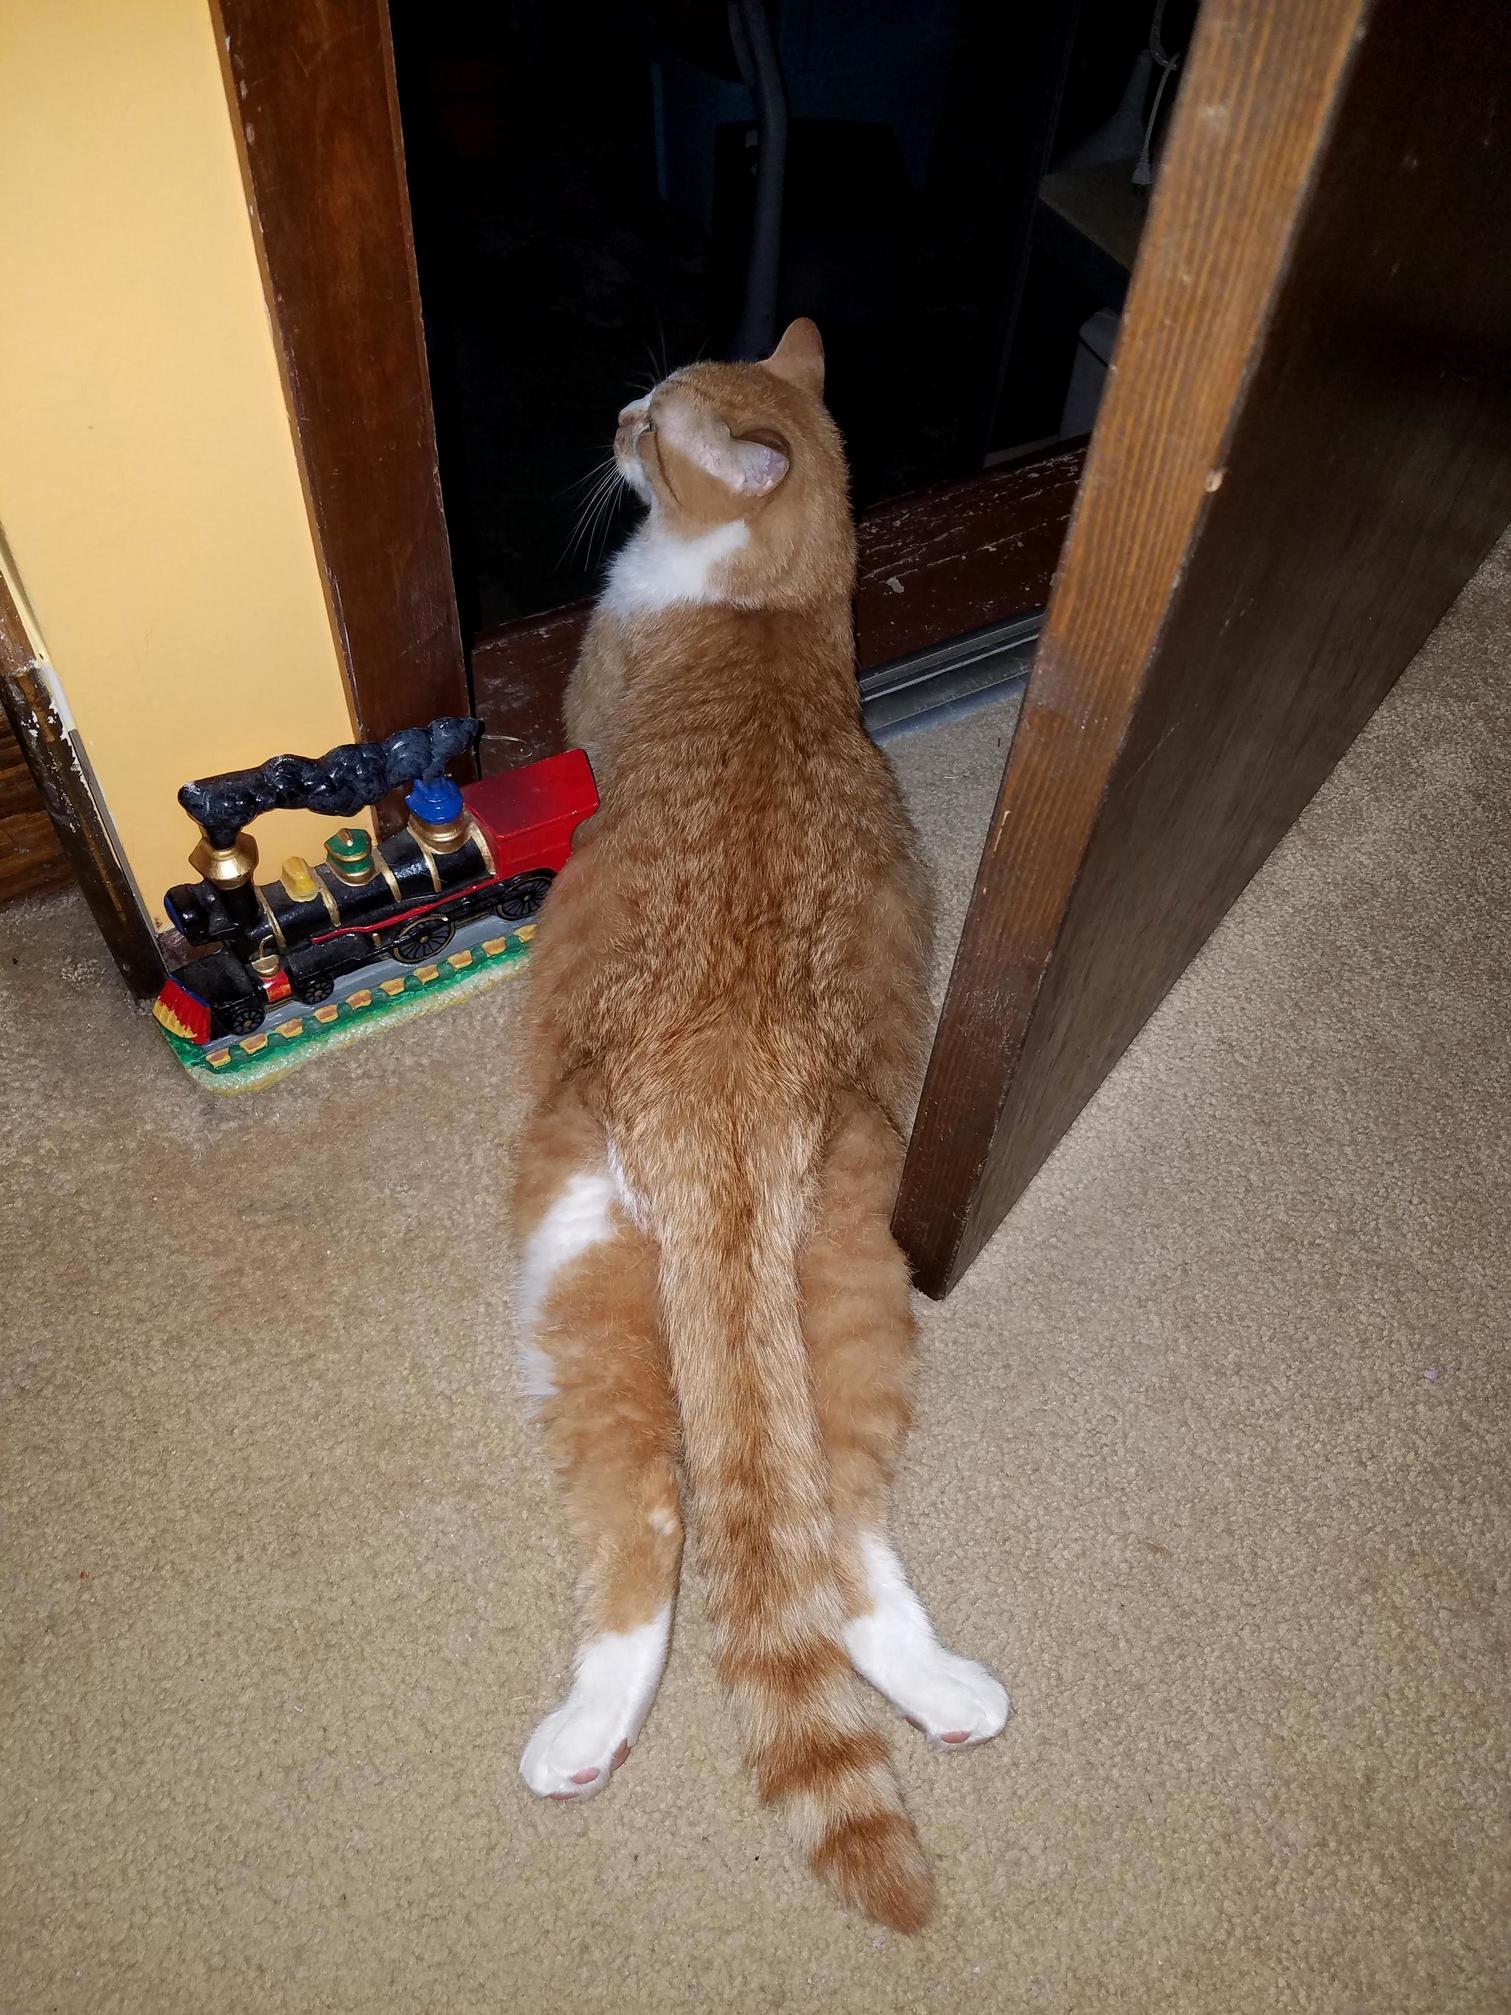 Waffles sploot in the doorway – none shall pass